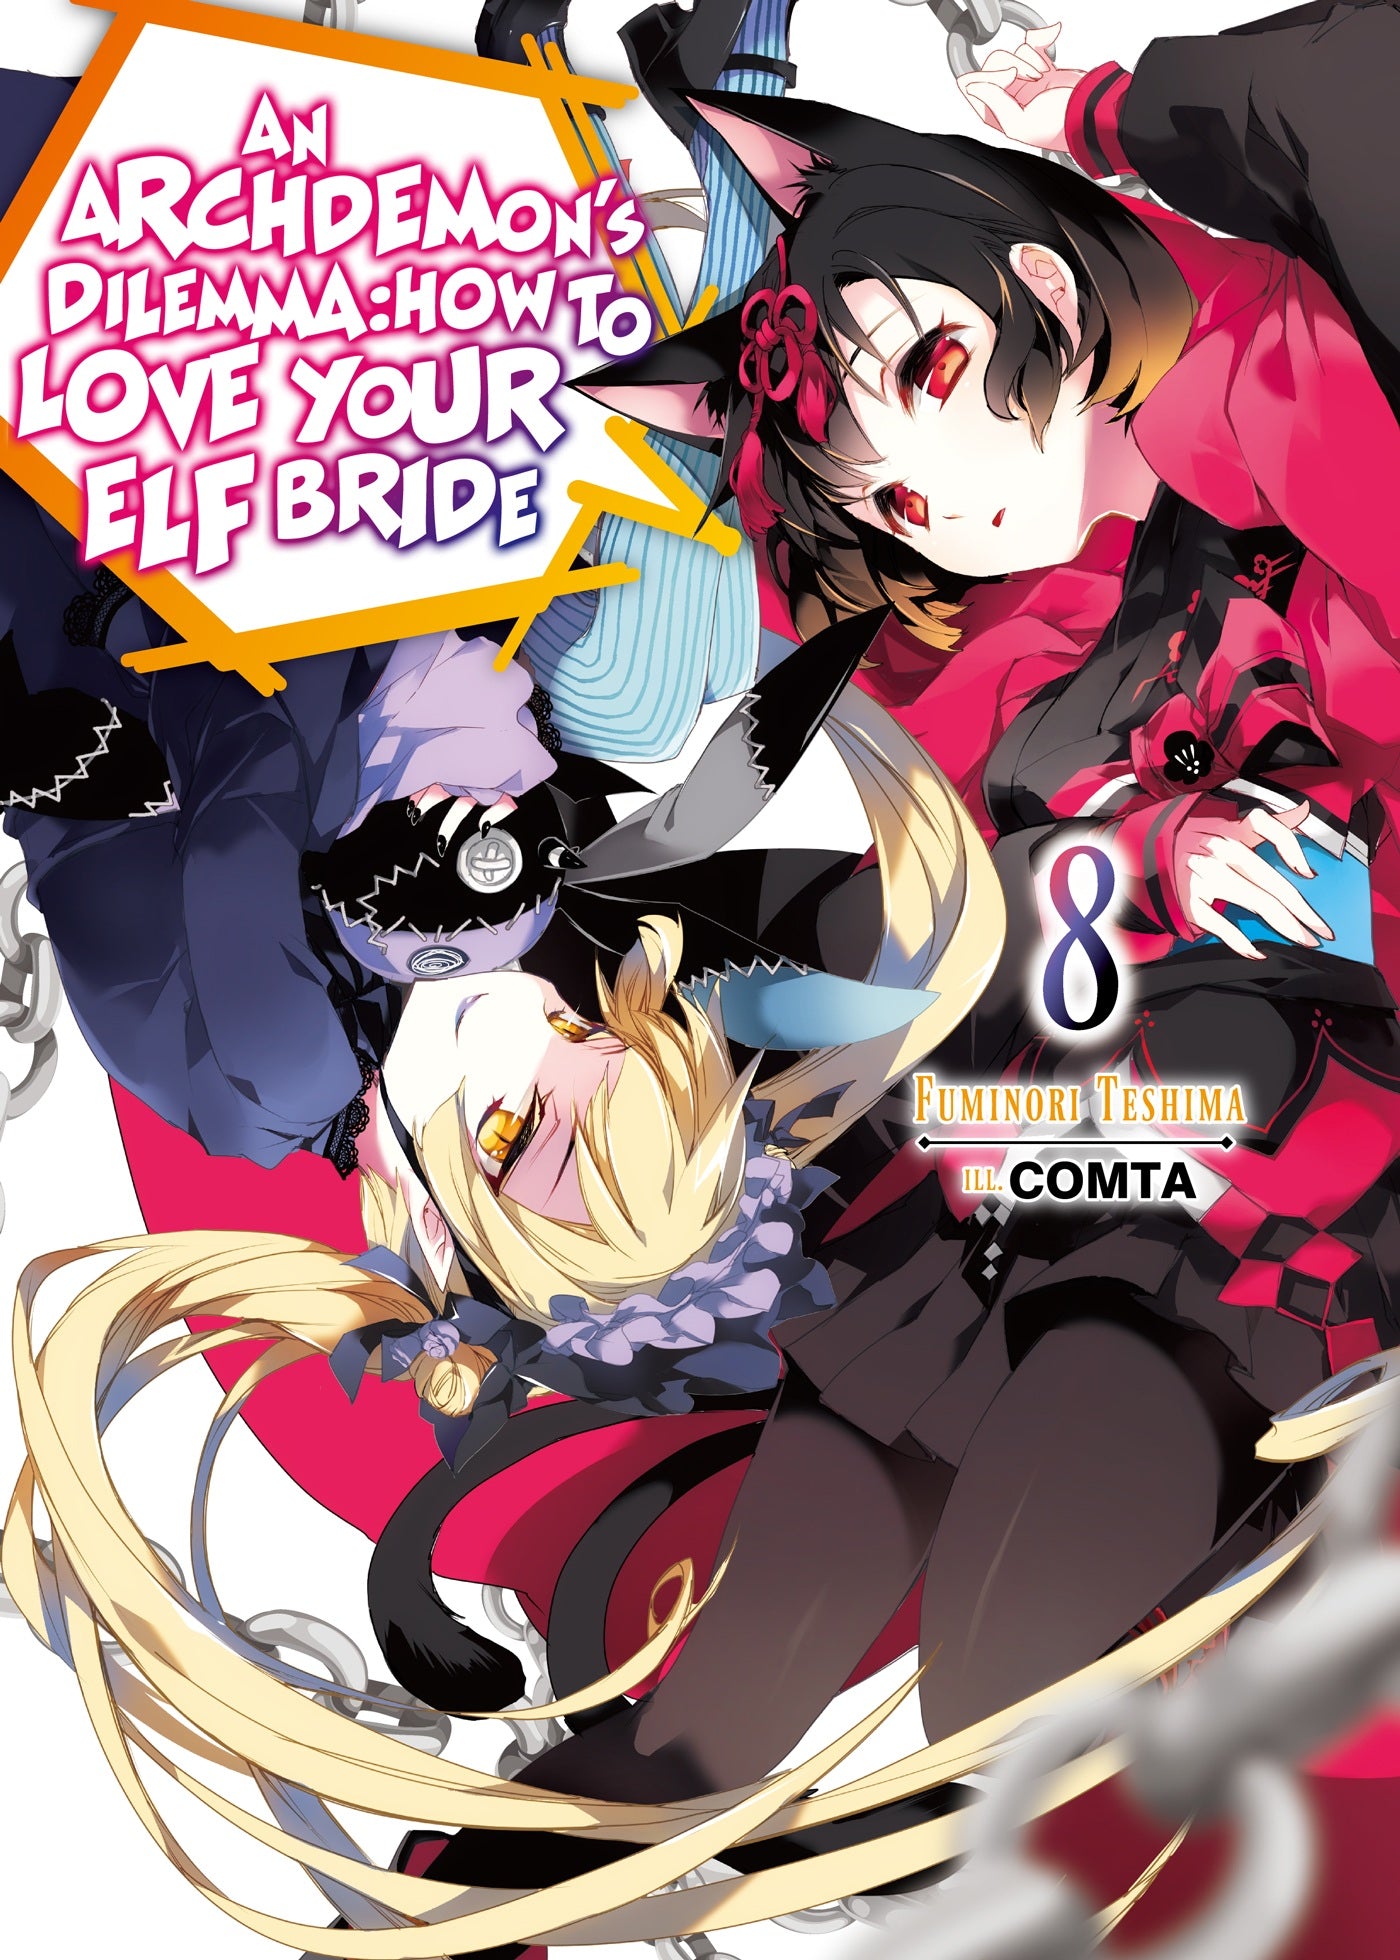 An Archdemon's Dilemma: How to Love Your Elf Bride: Volume 08